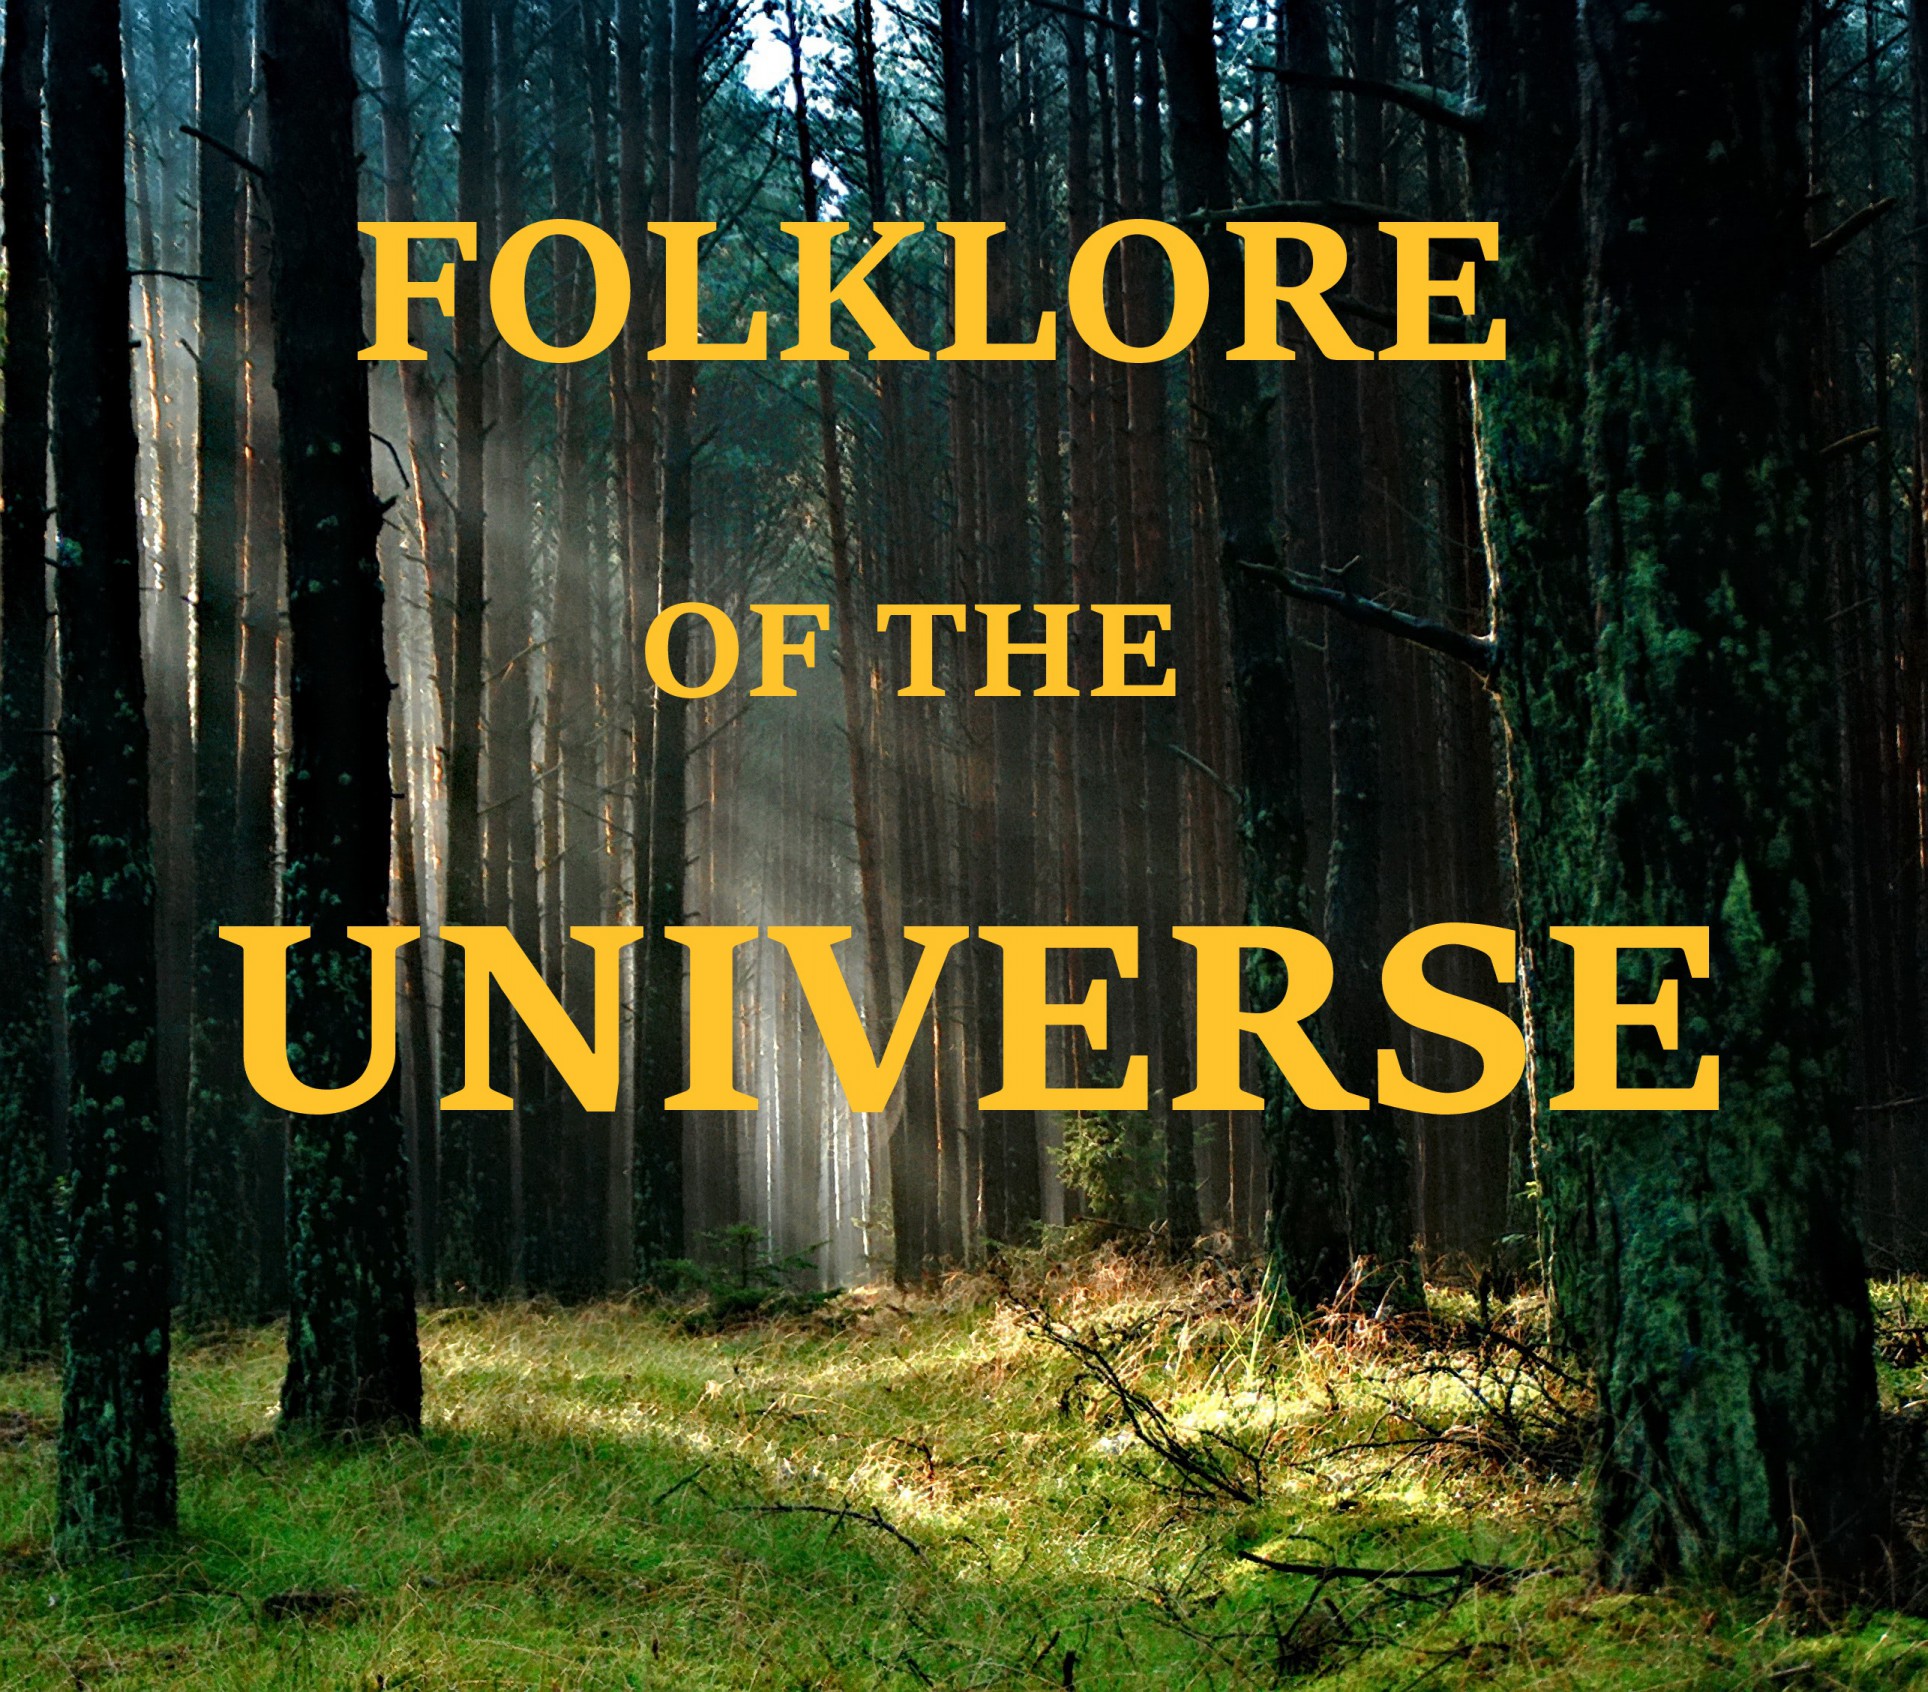 Folklore of the Universe